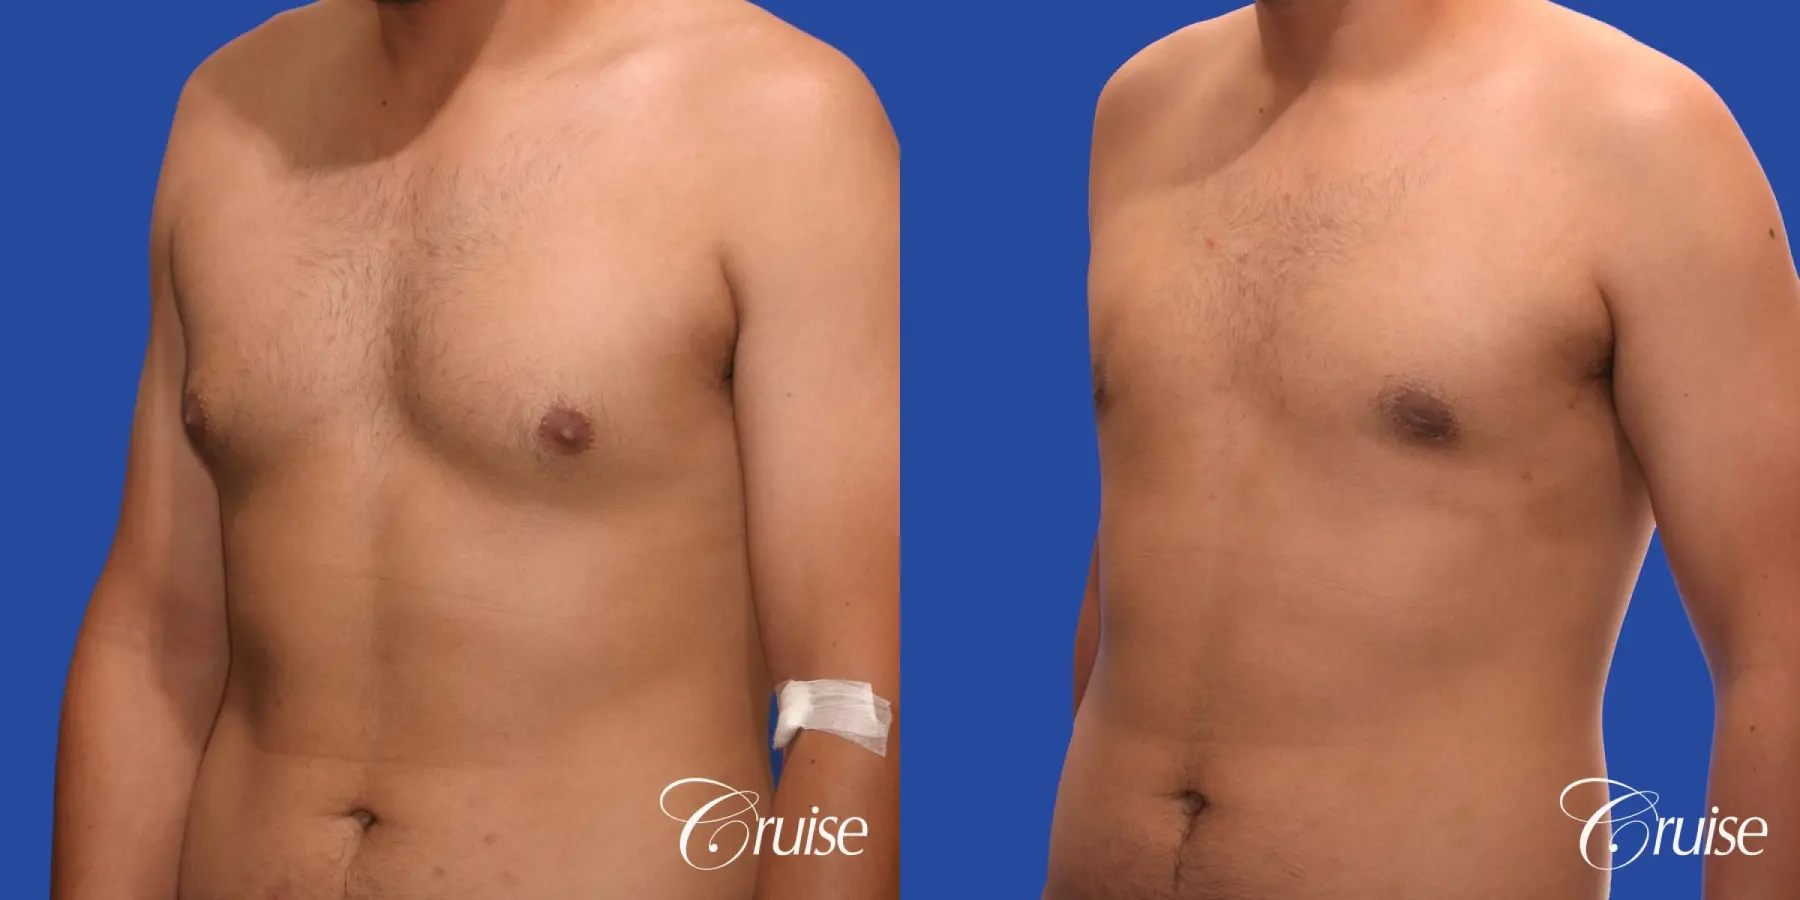 mild gynecomastia standard PA areola incision - Before and After 3